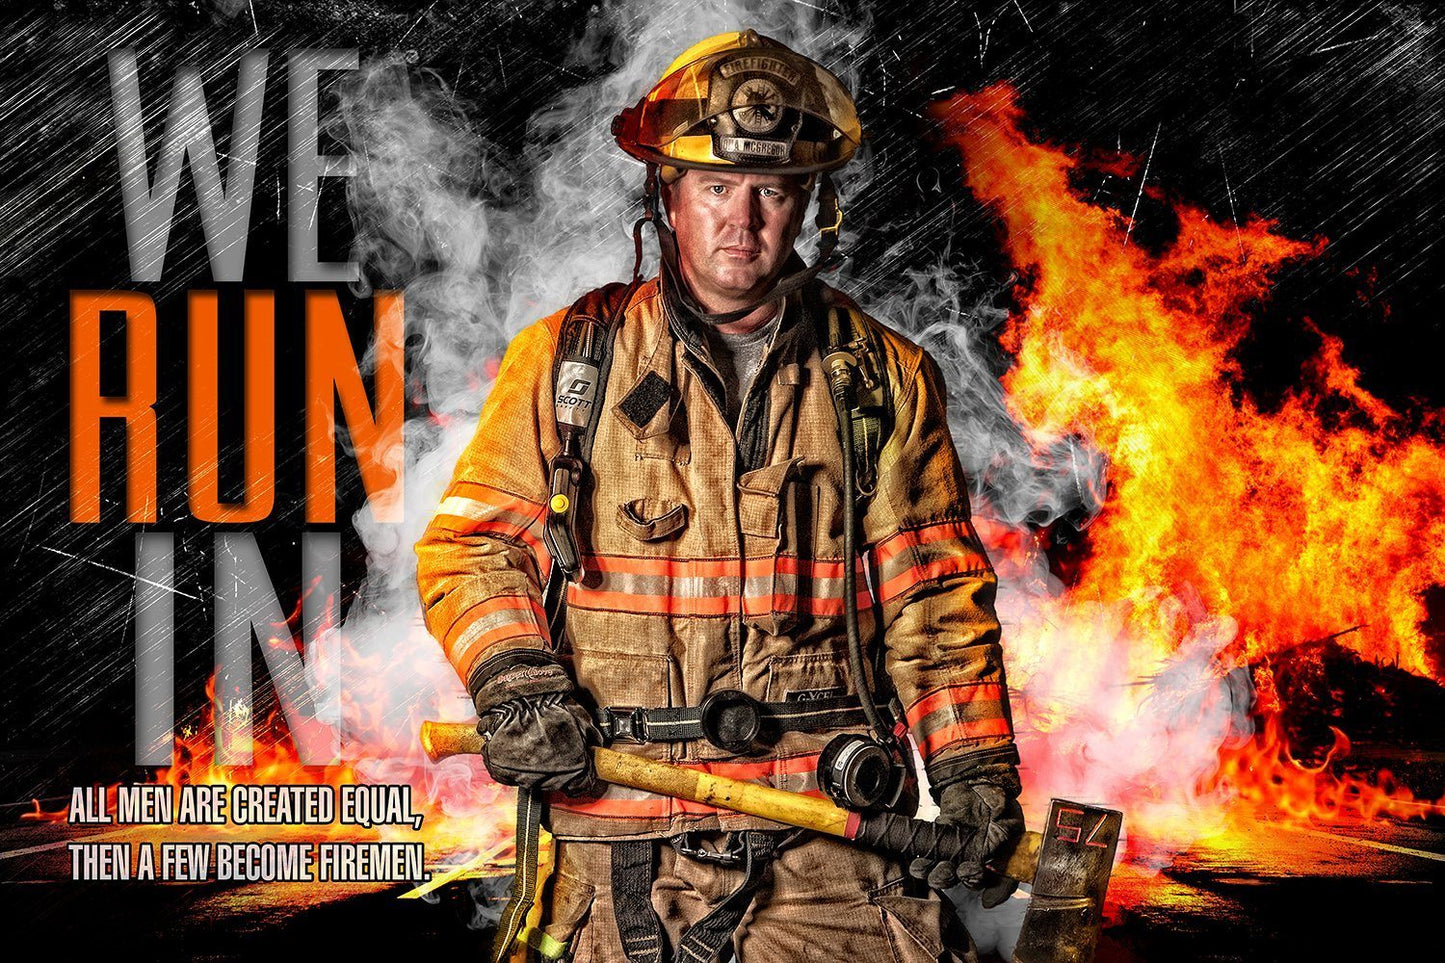 Fireman - V.3 - Heroes Series - Poster/Banner H-Photoshop Template - Photo Solutions